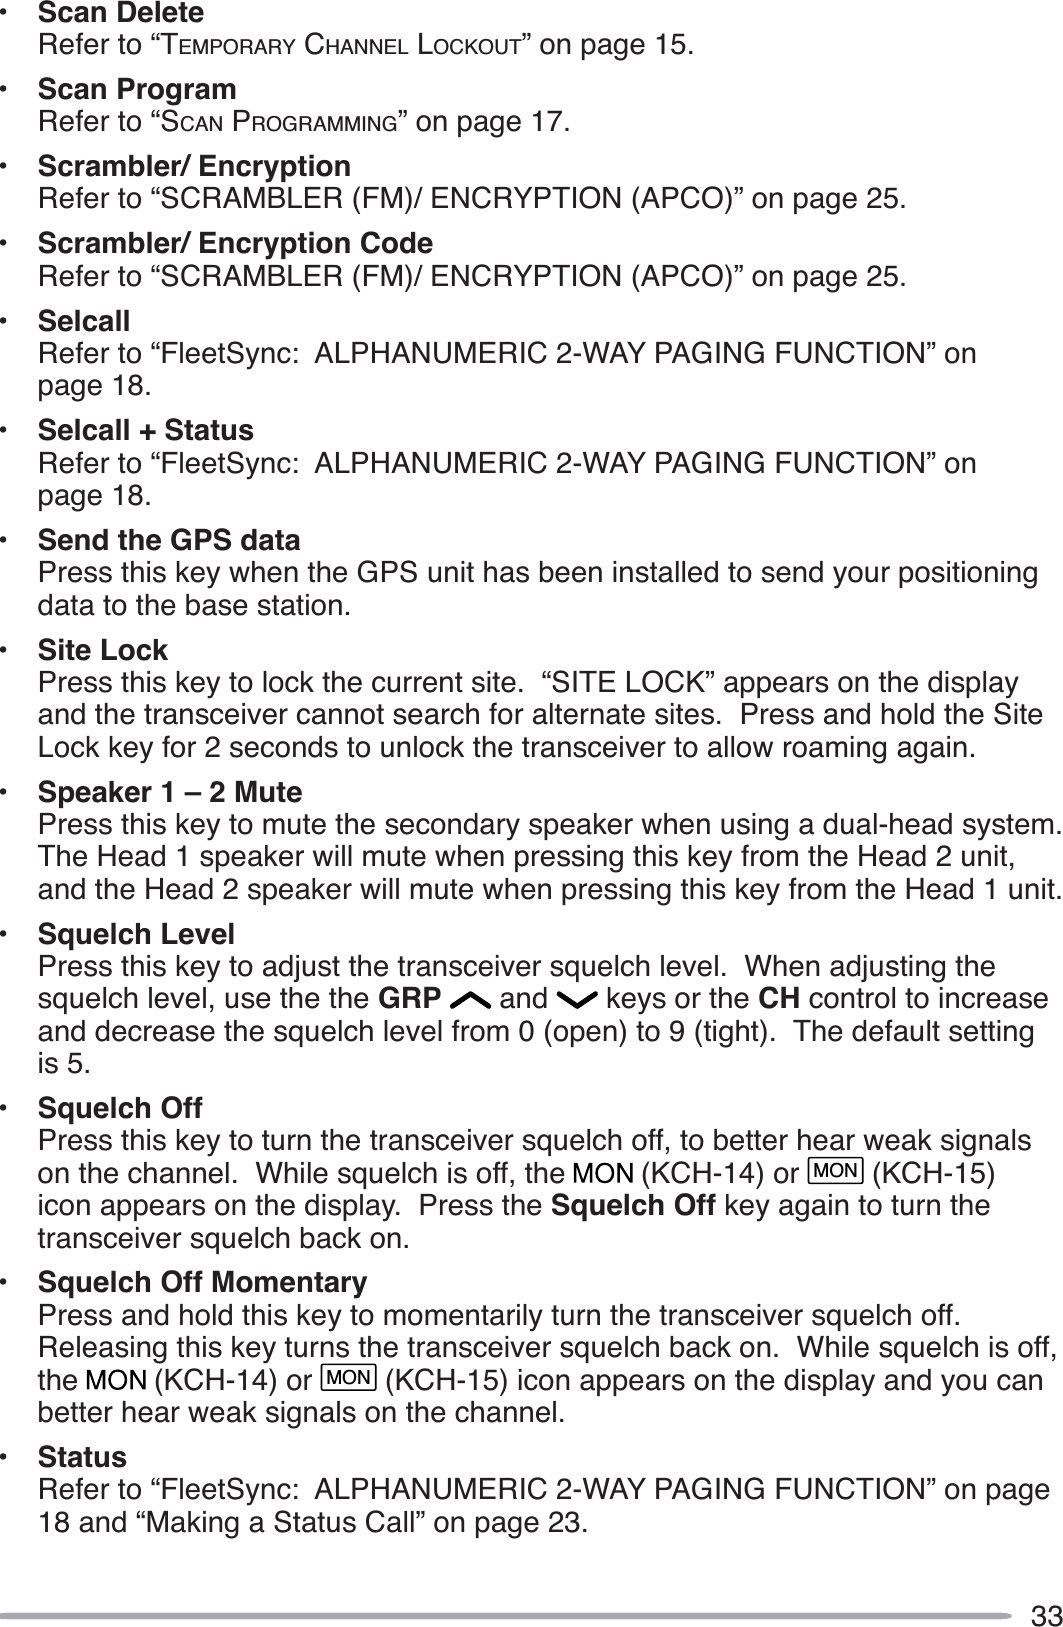 33• Scan DeleteRefer to “TEMPORARY CHANNEL LOCKOUT” on page 15.• Scan ProgramRefer to “SCAN PROGRAMMING” on page 17.• Scrambler/ EncryptionRefer to “SCRAMBLER (FM)/ ENCRYPTION (APCO)” on page 25.• Scrambler/ Encryption CodeRefer to “SCRAMBLER (FM)/ ENCRYPTION (APCO)” on page 25.• SelcallRefer to “FleetSync: ALPHANUMERIC 2-WAY PAGING FUNCTION” on page 18.• Selcall + StatusRefer to “FleetSync: ALPHANUMERIC 2-WAY PAGING FUNCTION” on page 18.• Send the GPS dataPress this key when the GPS unit has been installed to send your positioning data to the base station.• Site LockPress this key to lock the current site.  “SITE LOCK” appears on the display and the transceiver cannot search for alternate sites.  Press and hold the Site Lock key for 2 seconds to unlock the transceiver to allow roaming again.• Speaker 1 – 2 MutePress this key to mute the secondary speaker when using a dual-head system.  The Head 1 speaker will mute when pressing this key from the Head 2 unit, and the Head 2 speaker will mute when pressing this key from the Head 1 unit.• Squelch LevelPress this key to adjust the transceiver squelch level.  When adjusting the squelch level, use the the GRP  and   keys or the CH control to increase and decrease the squelch level from 0 (open) to 9 (tight).  The default setting is 5.• Squelch OffPress this key to turn the transceiver squelch off, to better hear weak signals on the channel.  While squelch is off, the   (KCH-14) or MON (KCH-15)icon appears on the display.  Press the Squelch Off key again to turn the transceiver squelch back on.• Squelch Off MomentaryPress and hold this key to momentarily turn the transceiver squelch off.  Releasing this key turns the transceiver squelch back on.  While squelch is off, the  (KCH-14) or MON (KCH-15) icon appears on the display and you can better hear weak signals on the channel.• StatusRefer to “FleetSync: ALPHANUMERIC 2-WAY PAGING FUNCTION” on page 18 and “Making a Status Call” on page 23.